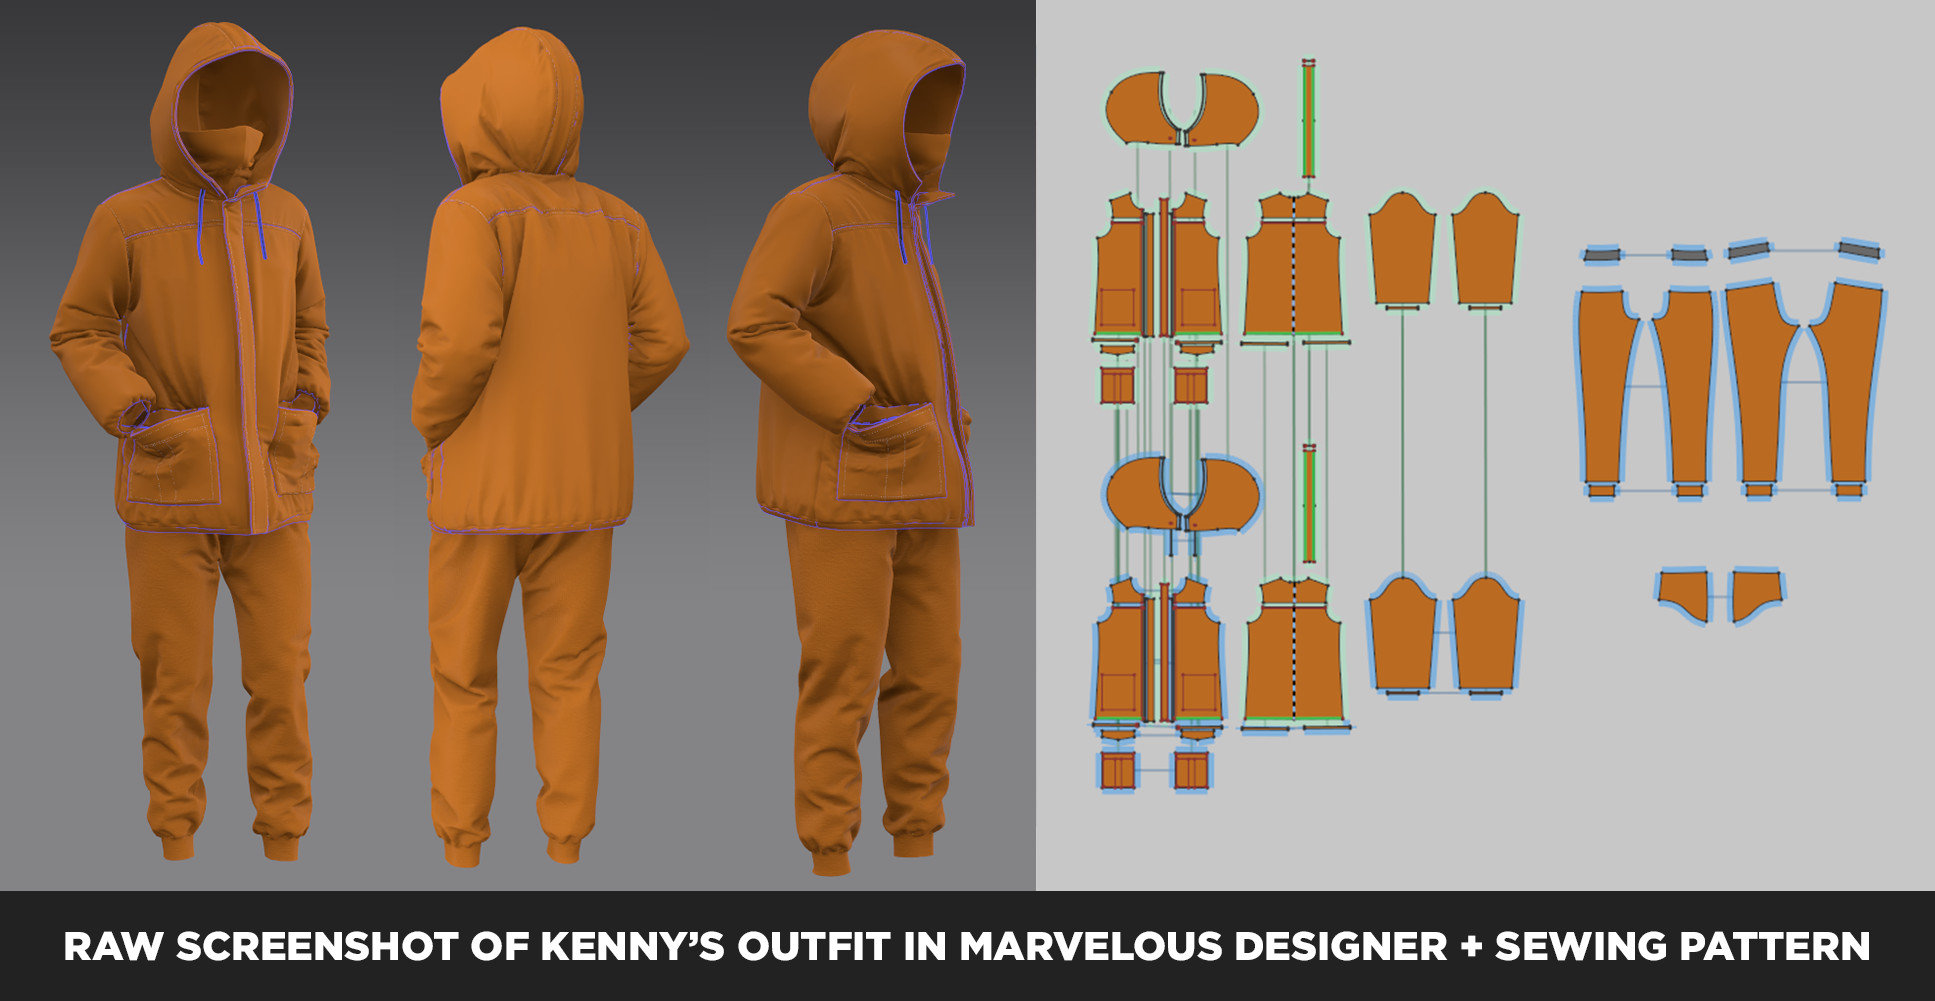 Marvelous Designer helps me to create so many different types of garments. 